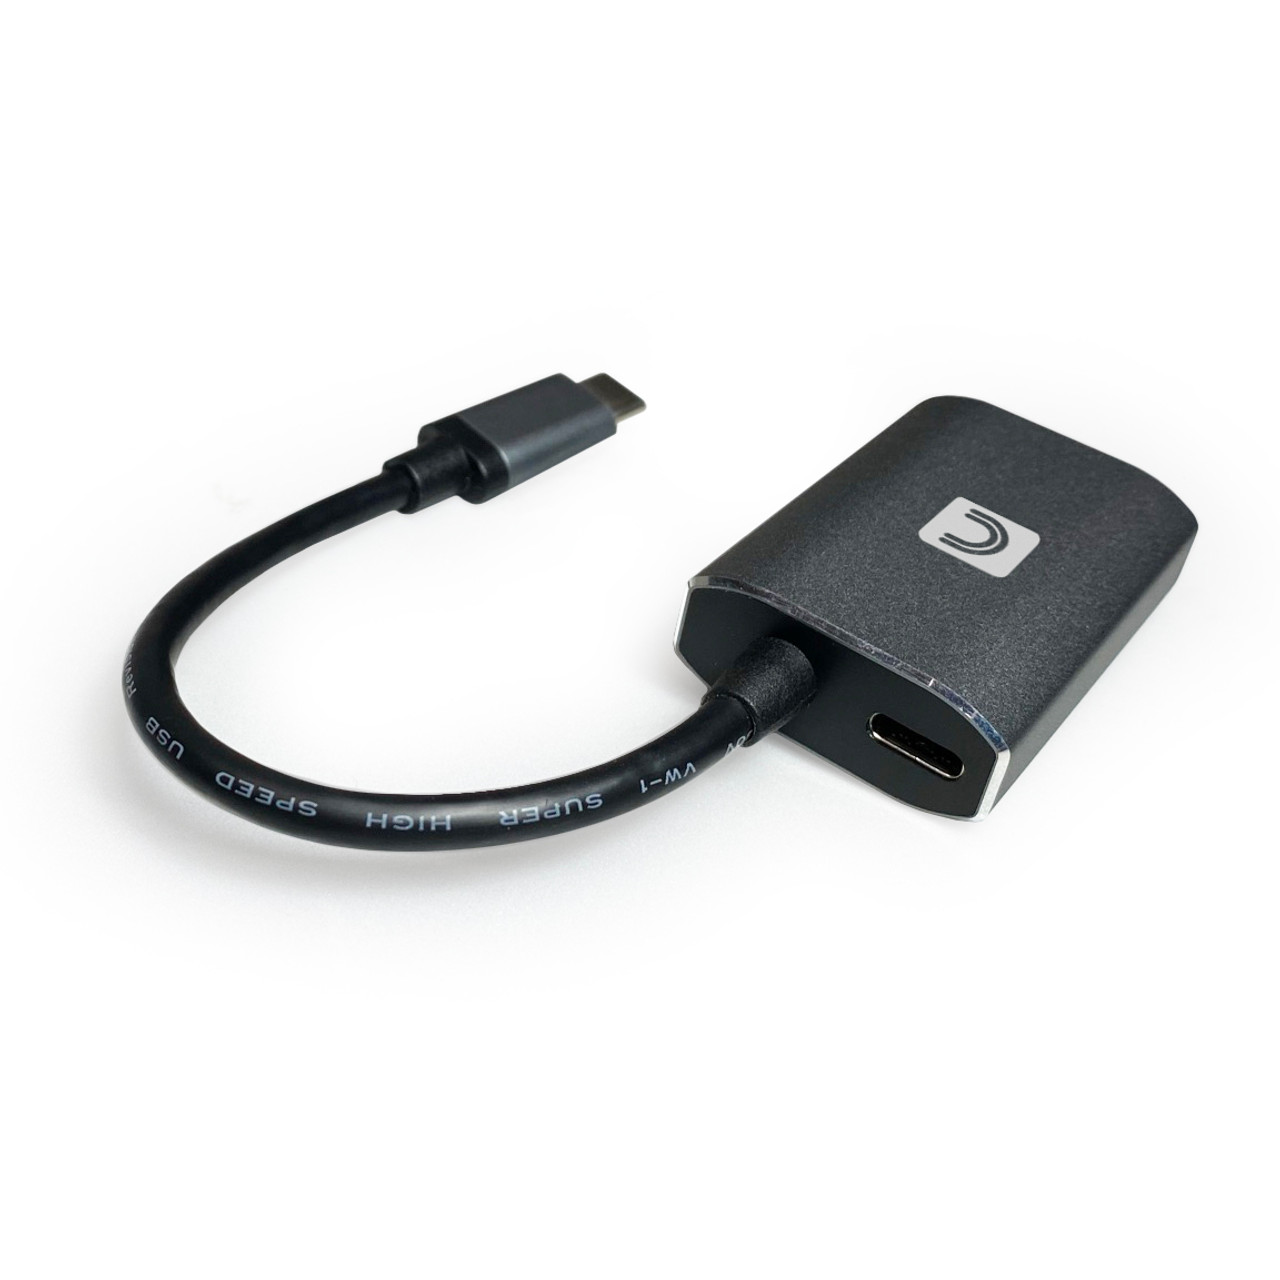 USB-C to HDMI + Charge Adapter